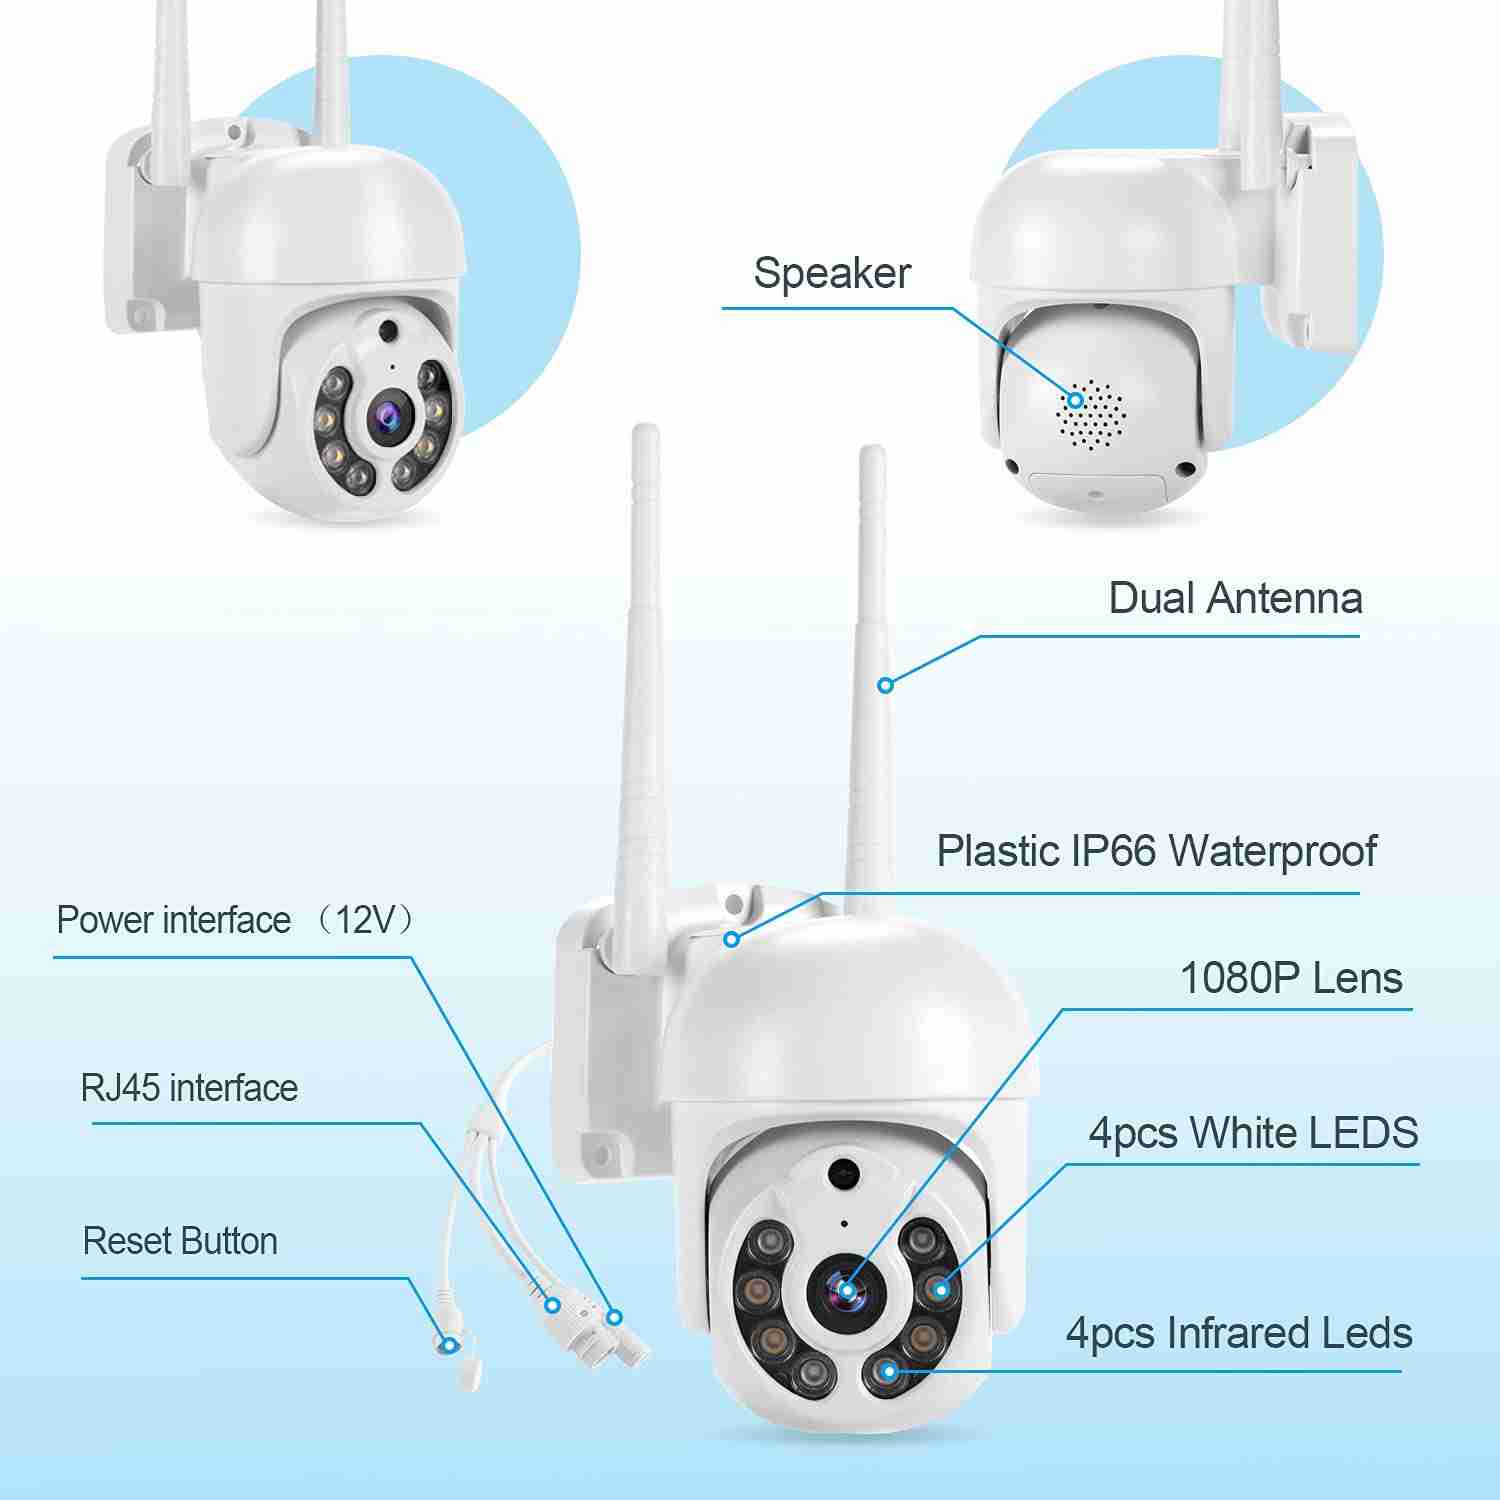 outdoor-pt-wifi-ip-security-camera-3mp for cheap